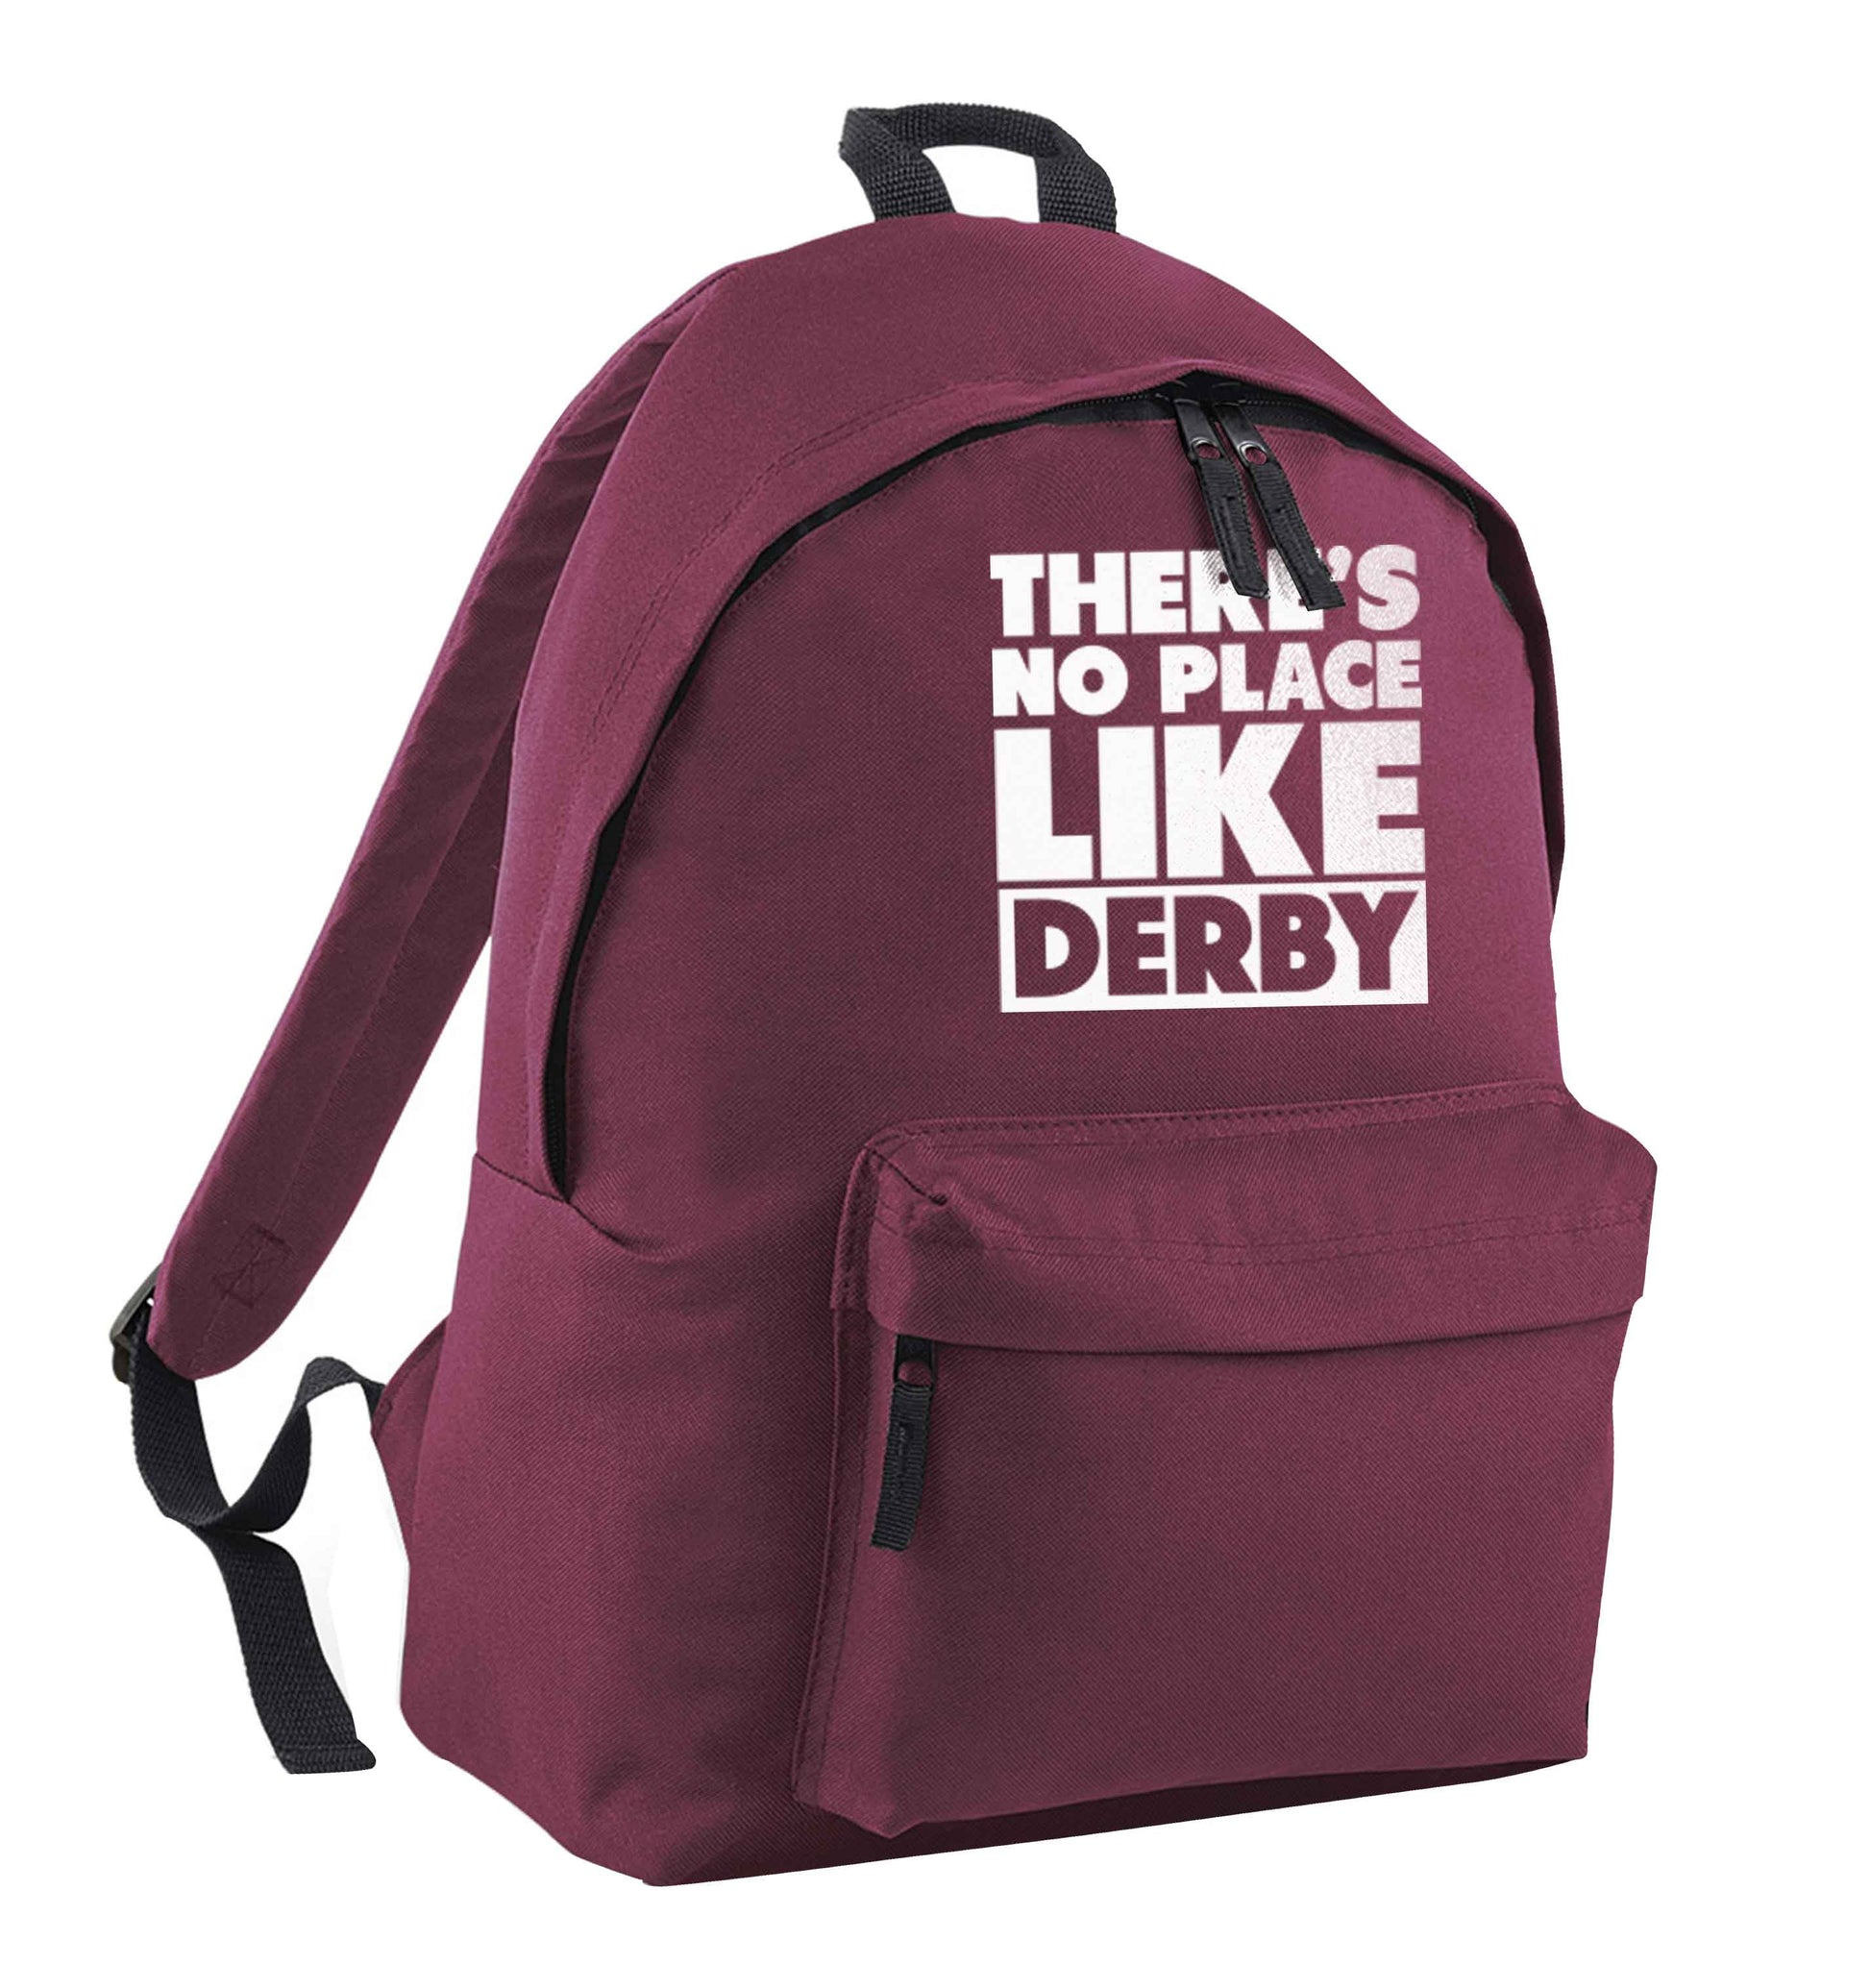 There's no place like Derby maroon adults backpack